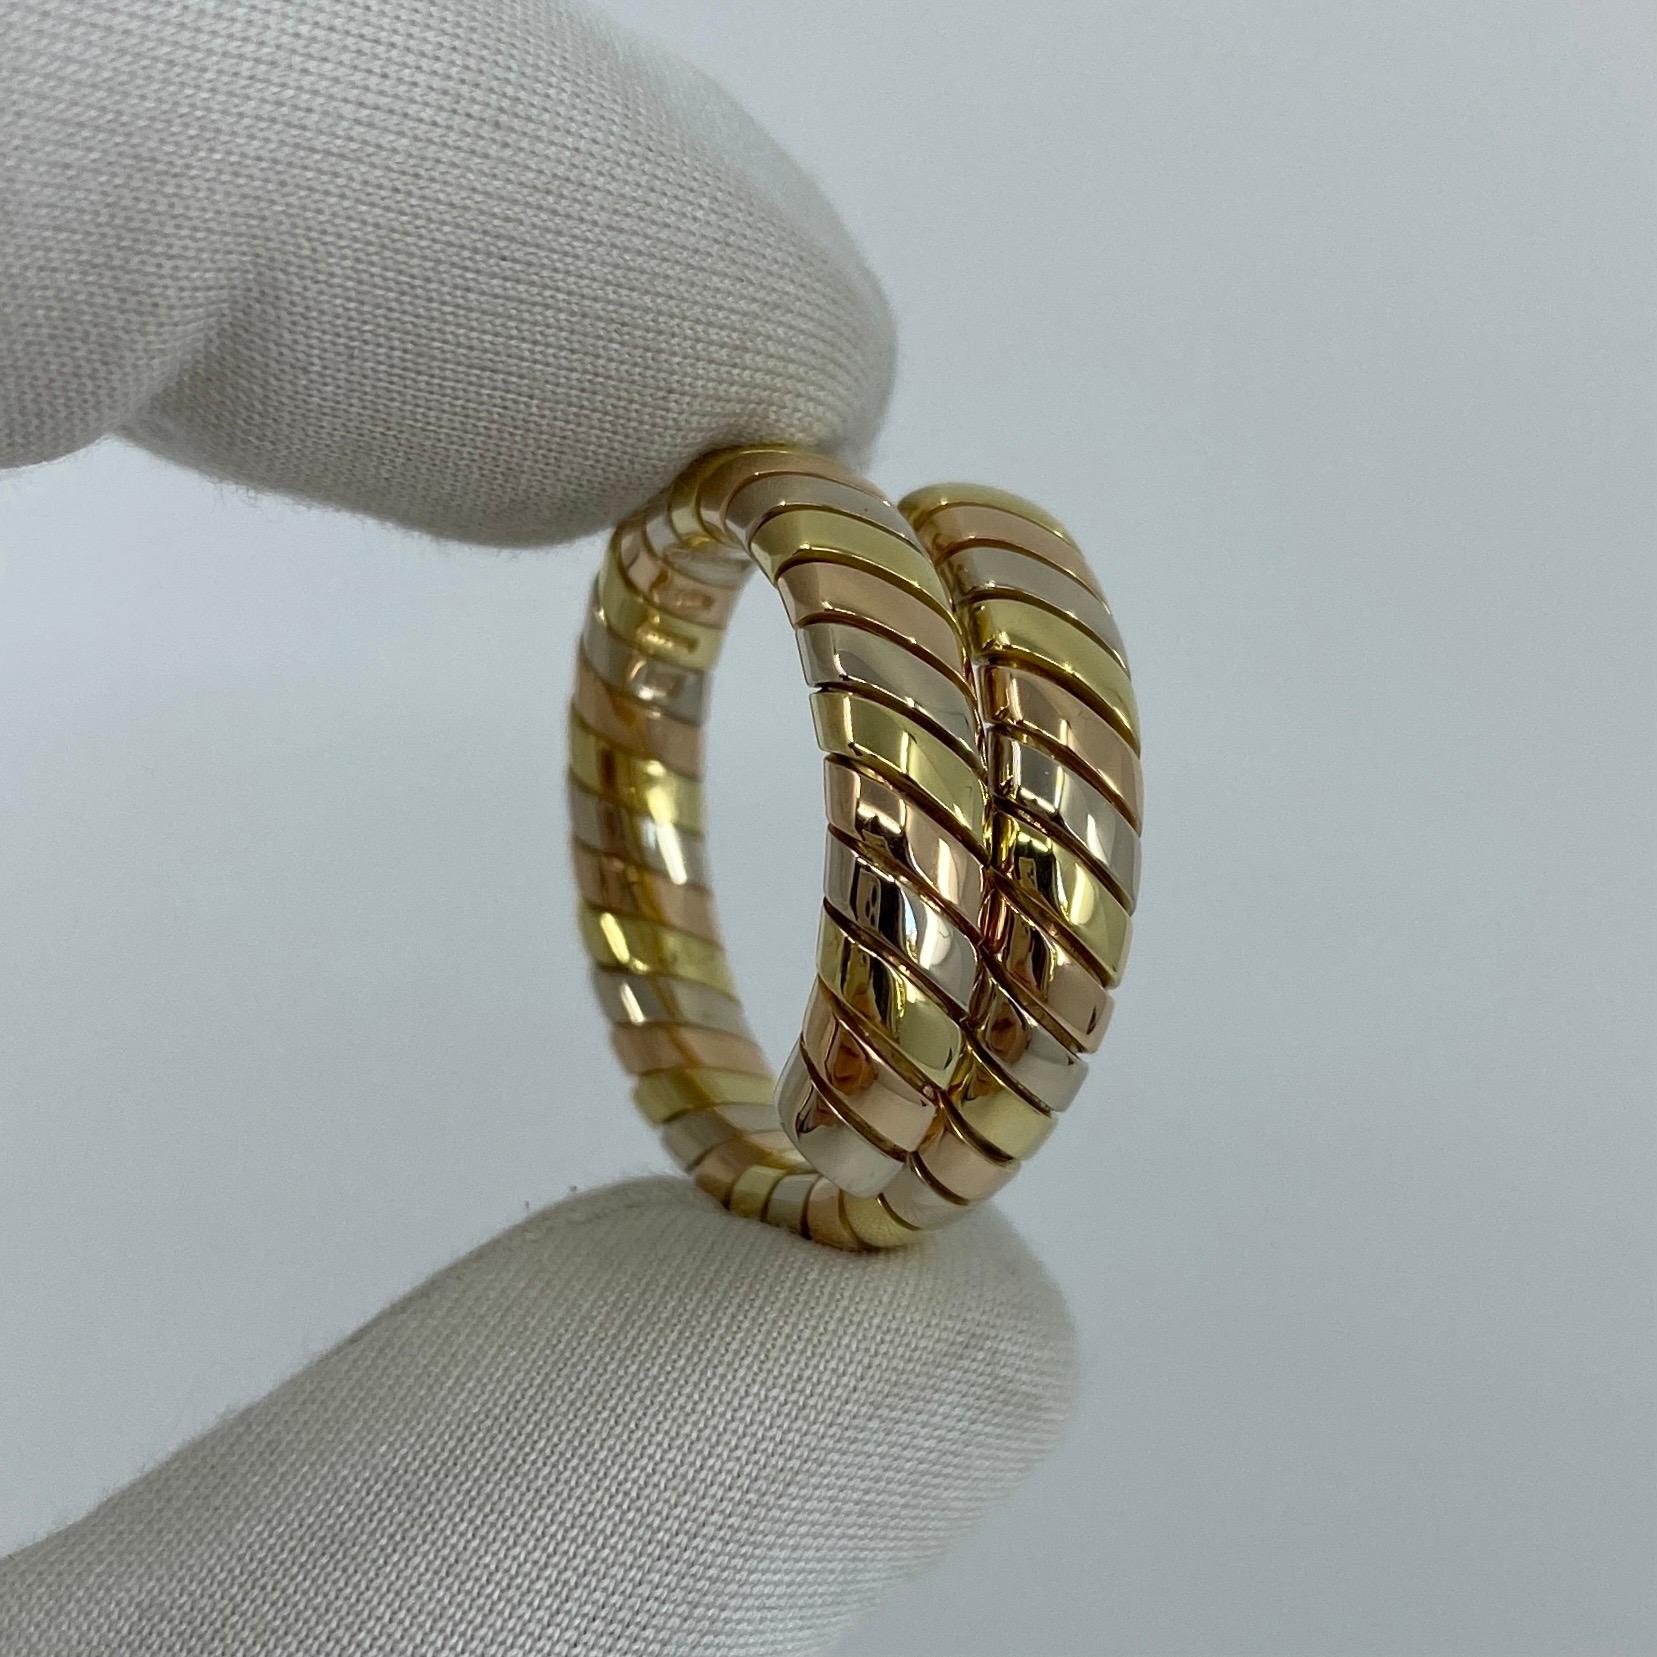 Vintage 18k Tricolour Gold Bvlgari Tubogas Flexi Ring.

This stylish design features alternating bands of white, yellow and rose gold tapering up to two rows on a flexi band. A rare and sought after vintage bvlgari piece.
In excellent condition, has